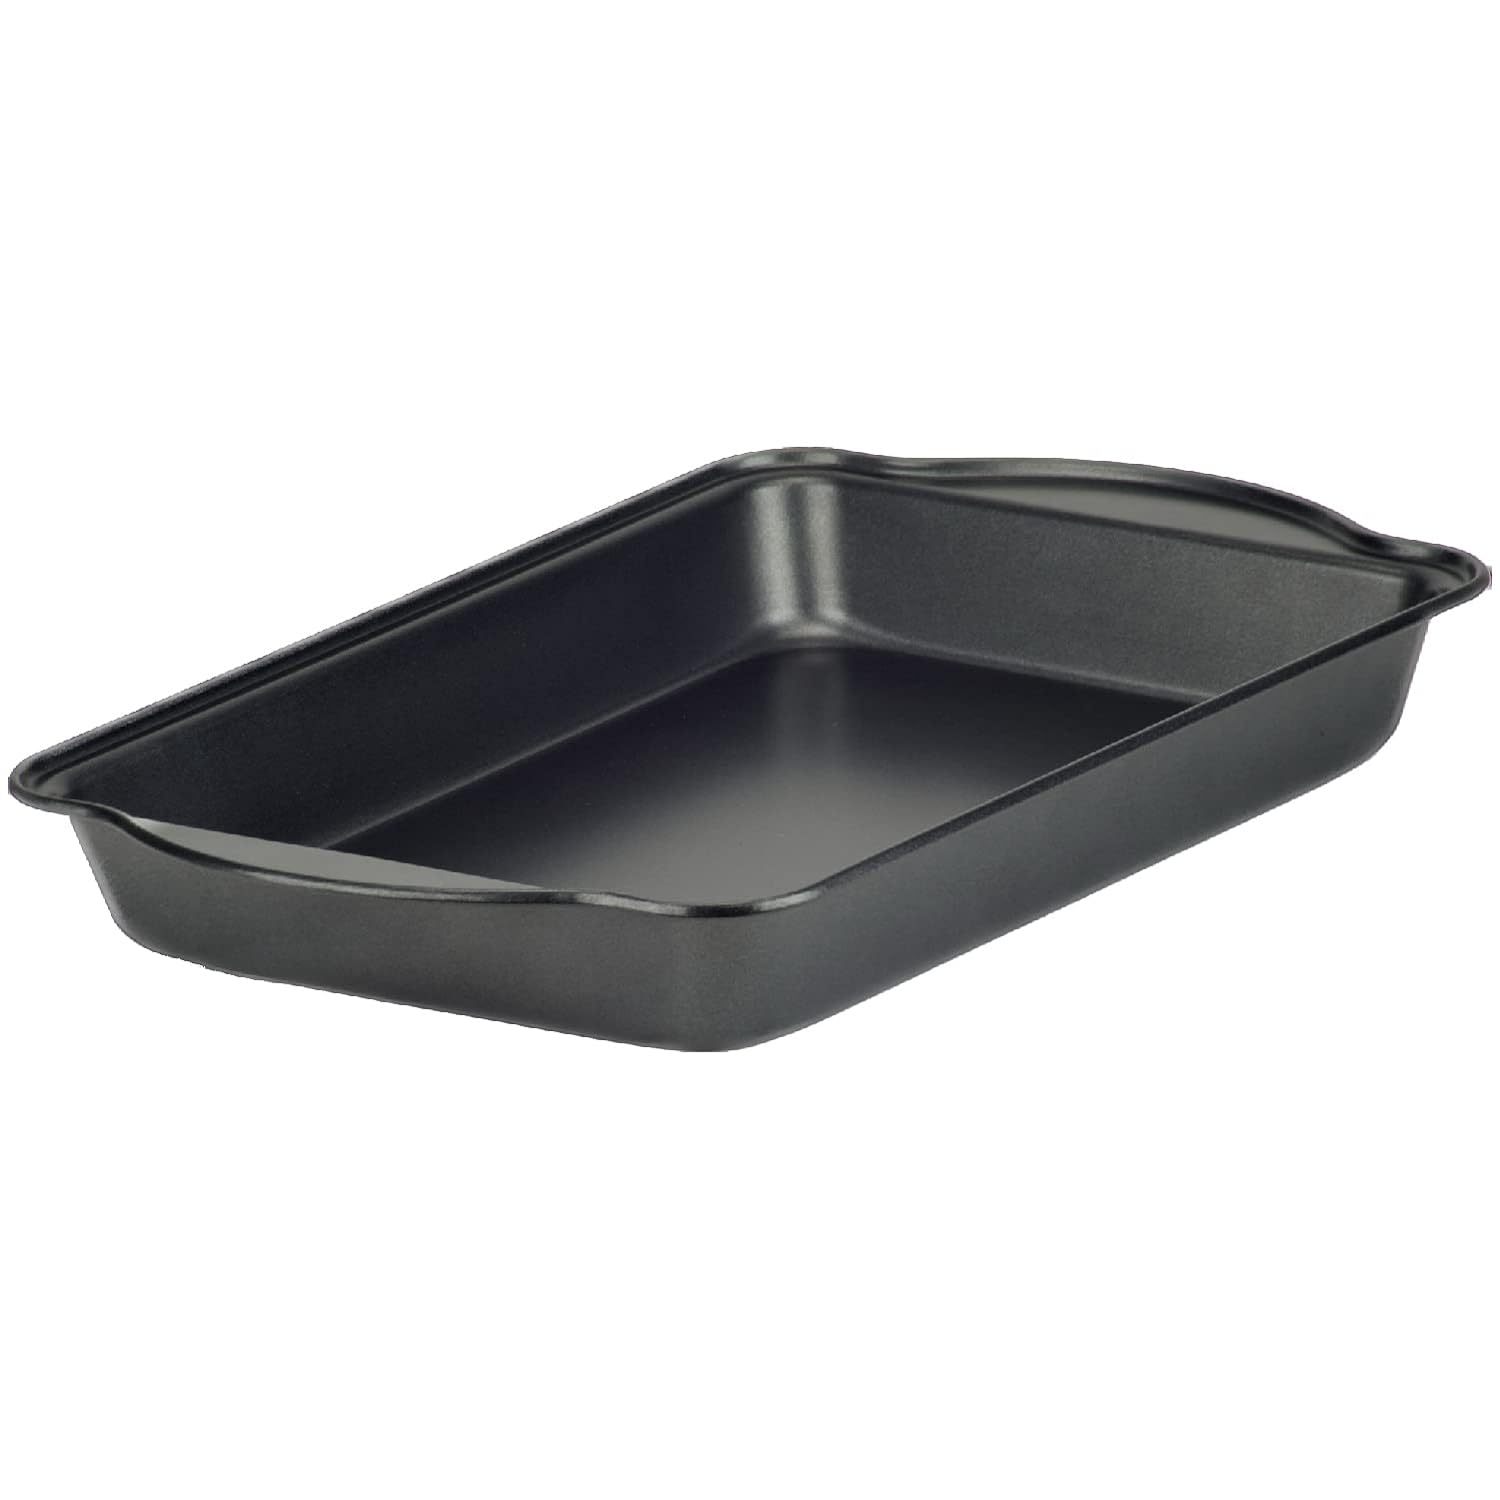 Great Choice Products Non-Stick Lasagna Pan, 12.5 Inch Baking And Roasting Pan, Heavy Duty Bakeware For Oven (1 Pack)